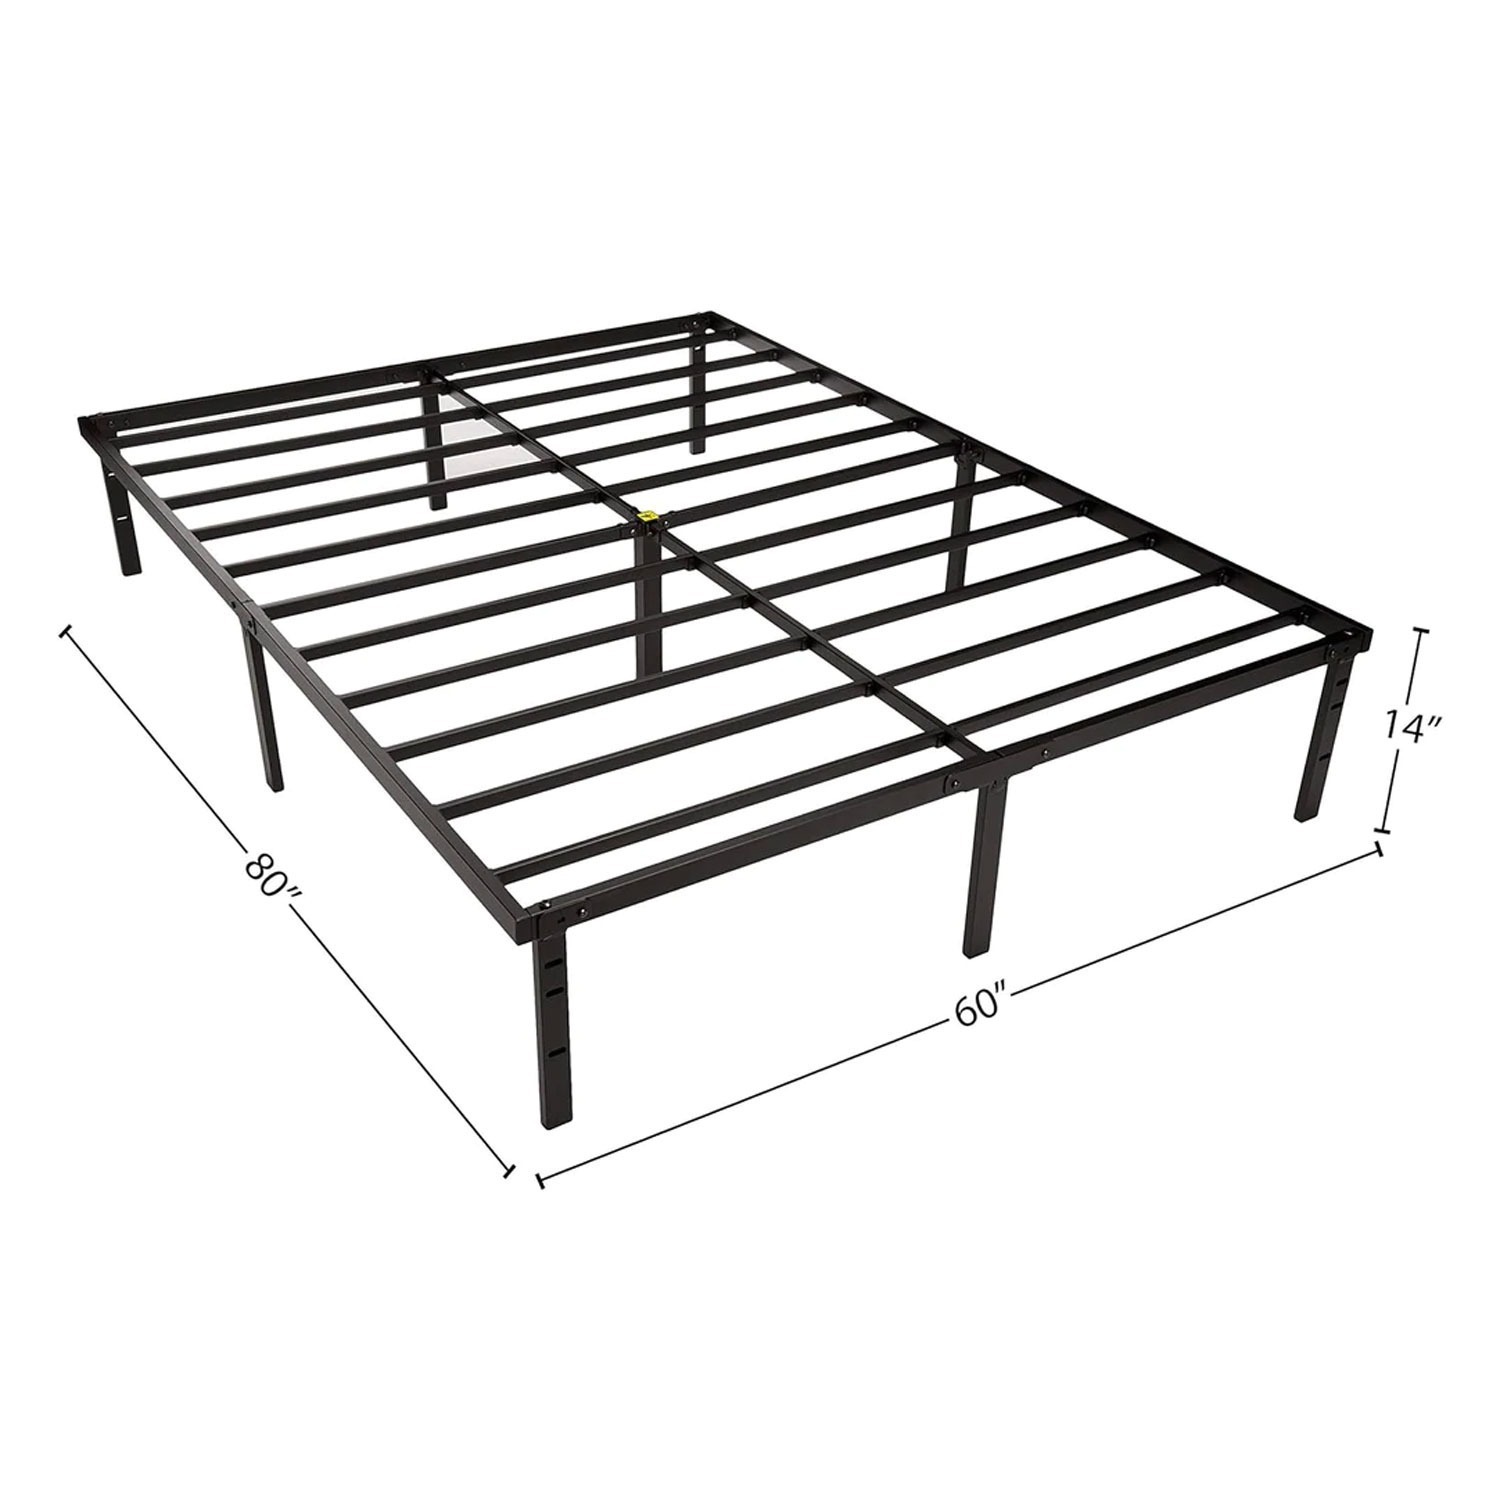 Amazon Basics Bed Frame with Steel Slats: Twin $32, Full $40, Queen $48 + Free Shipping